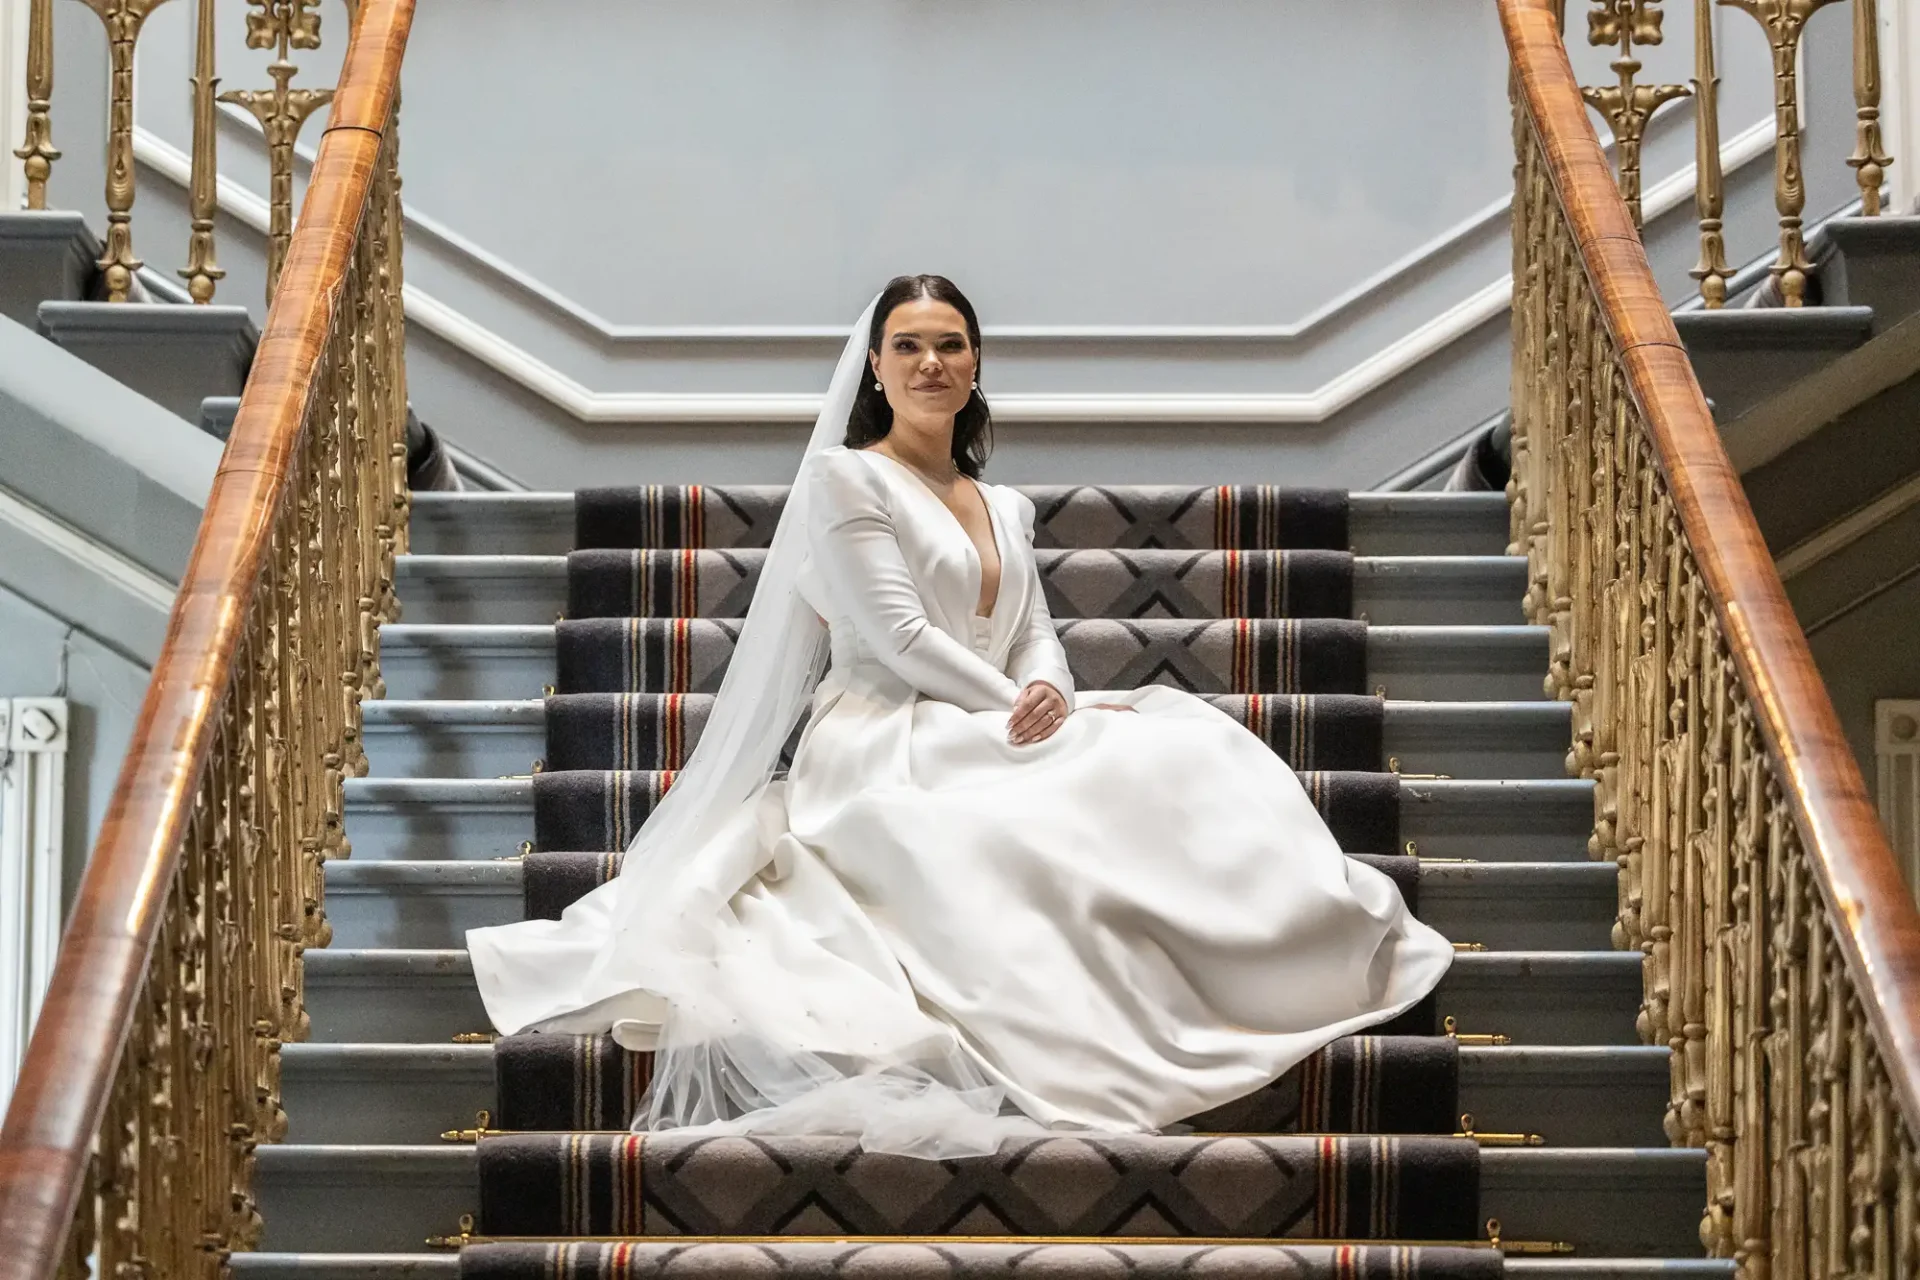 A bride in a white dress smiles while sitting on a staircase with ornate railings in an elegant interior.